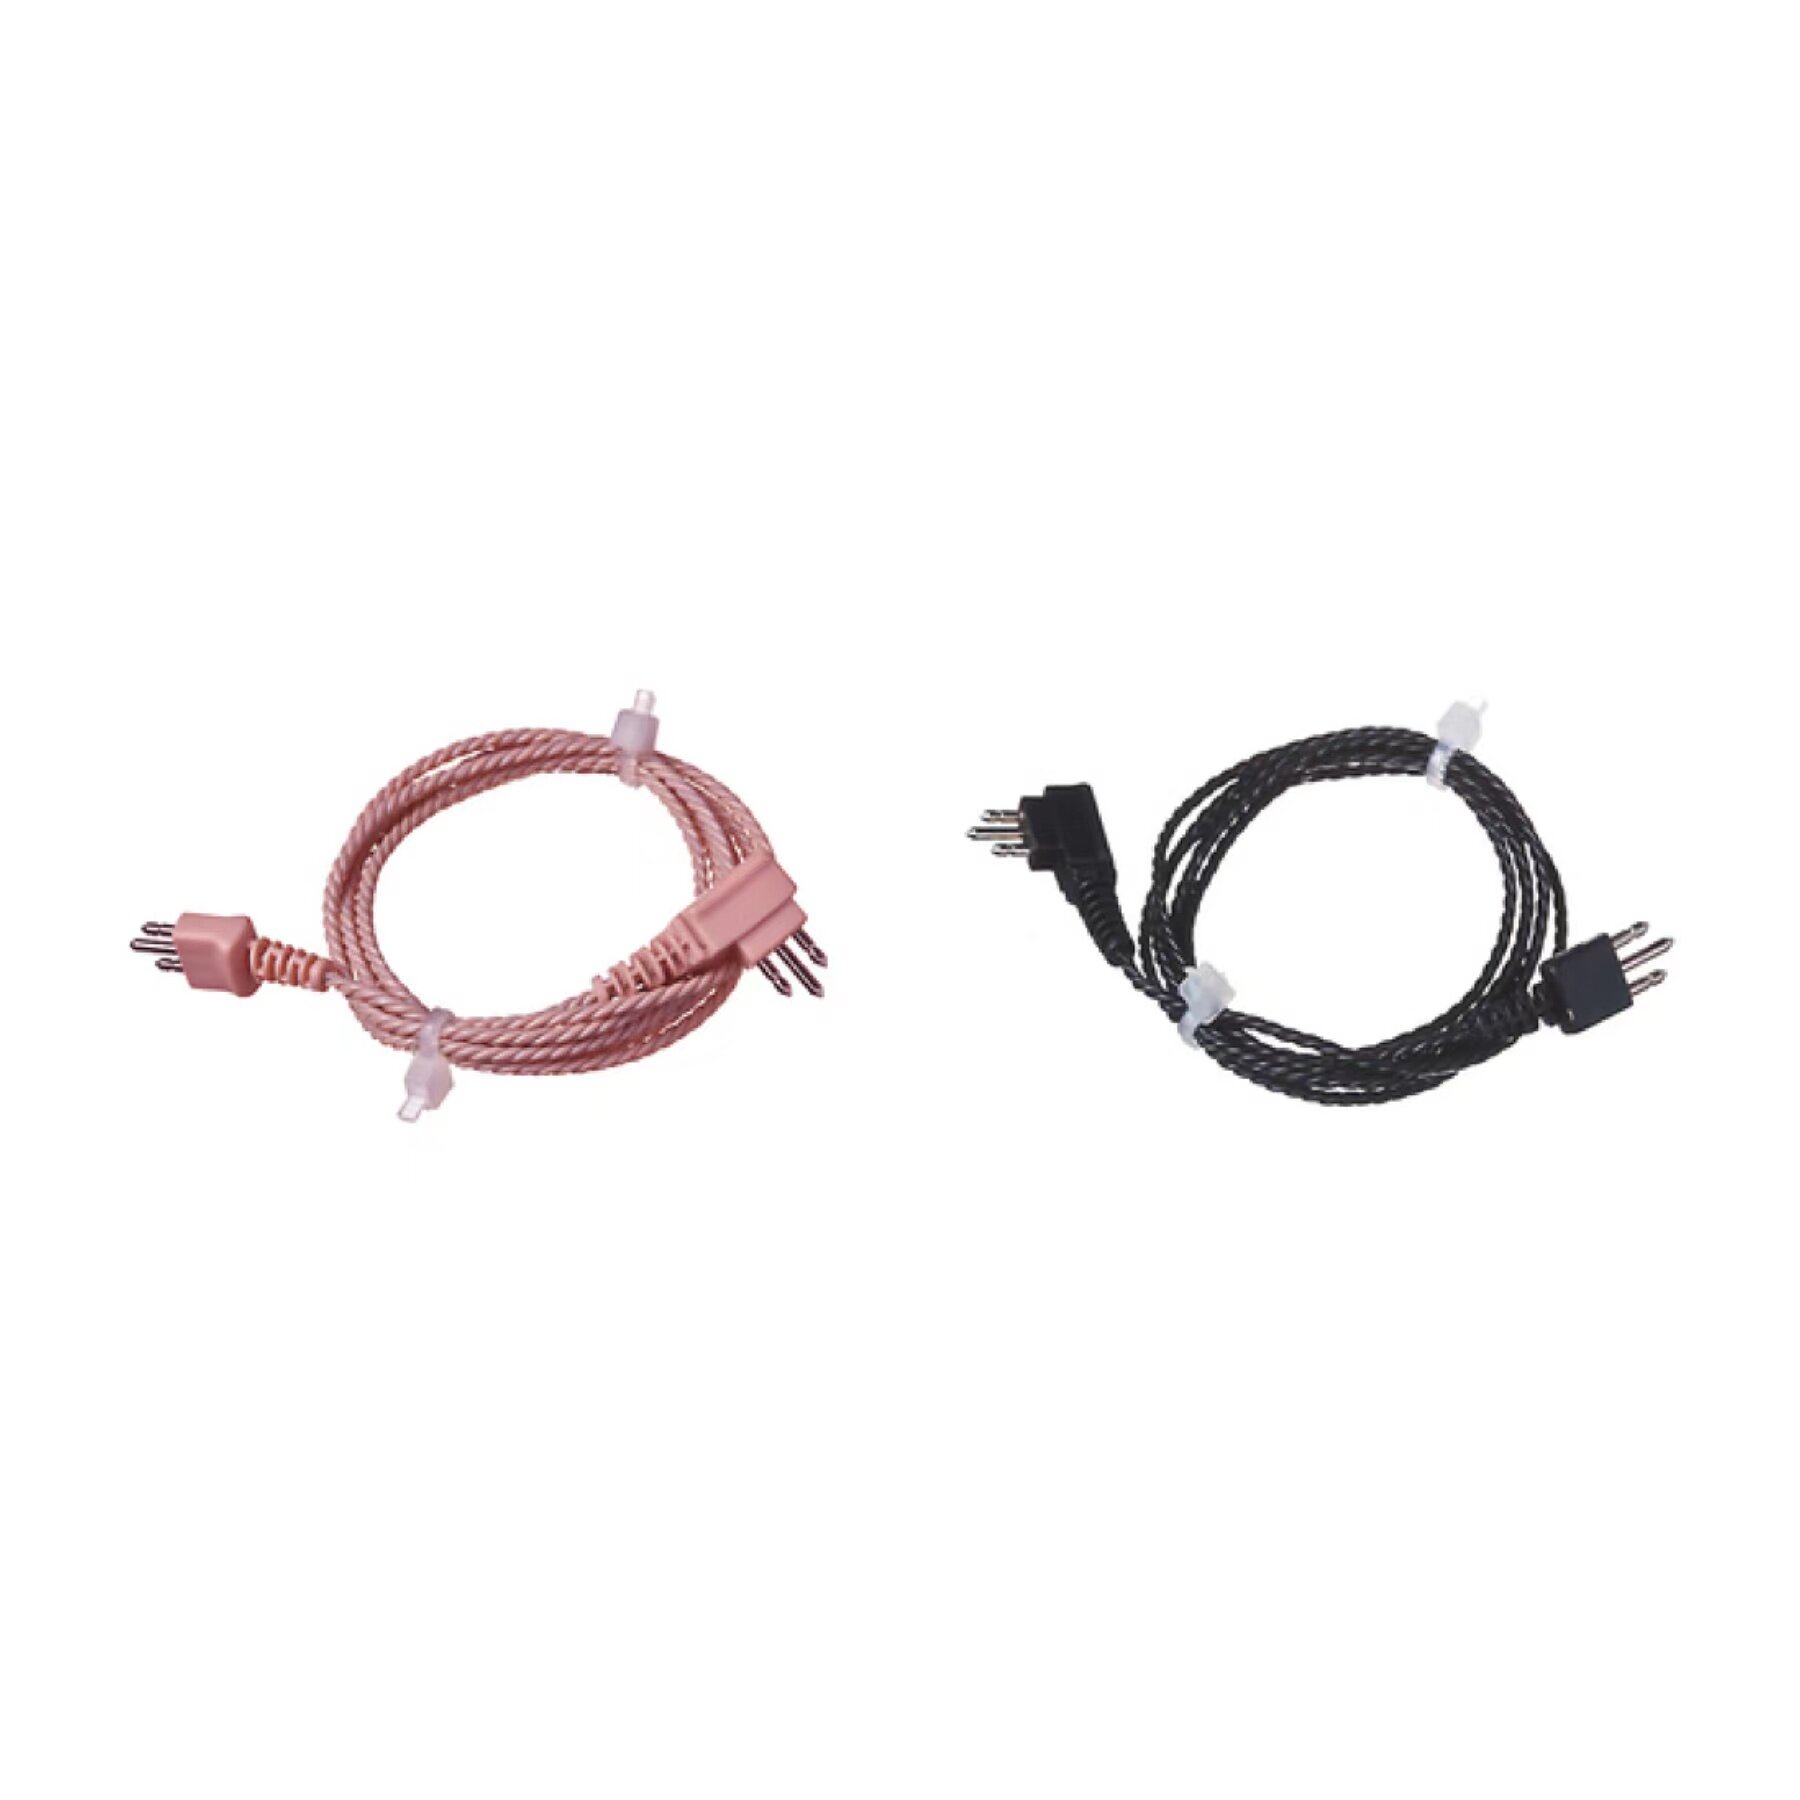 Hearing Aid Accessories 3 Pin Hearing Aid Cord Cable For Pocket Hearing Aids